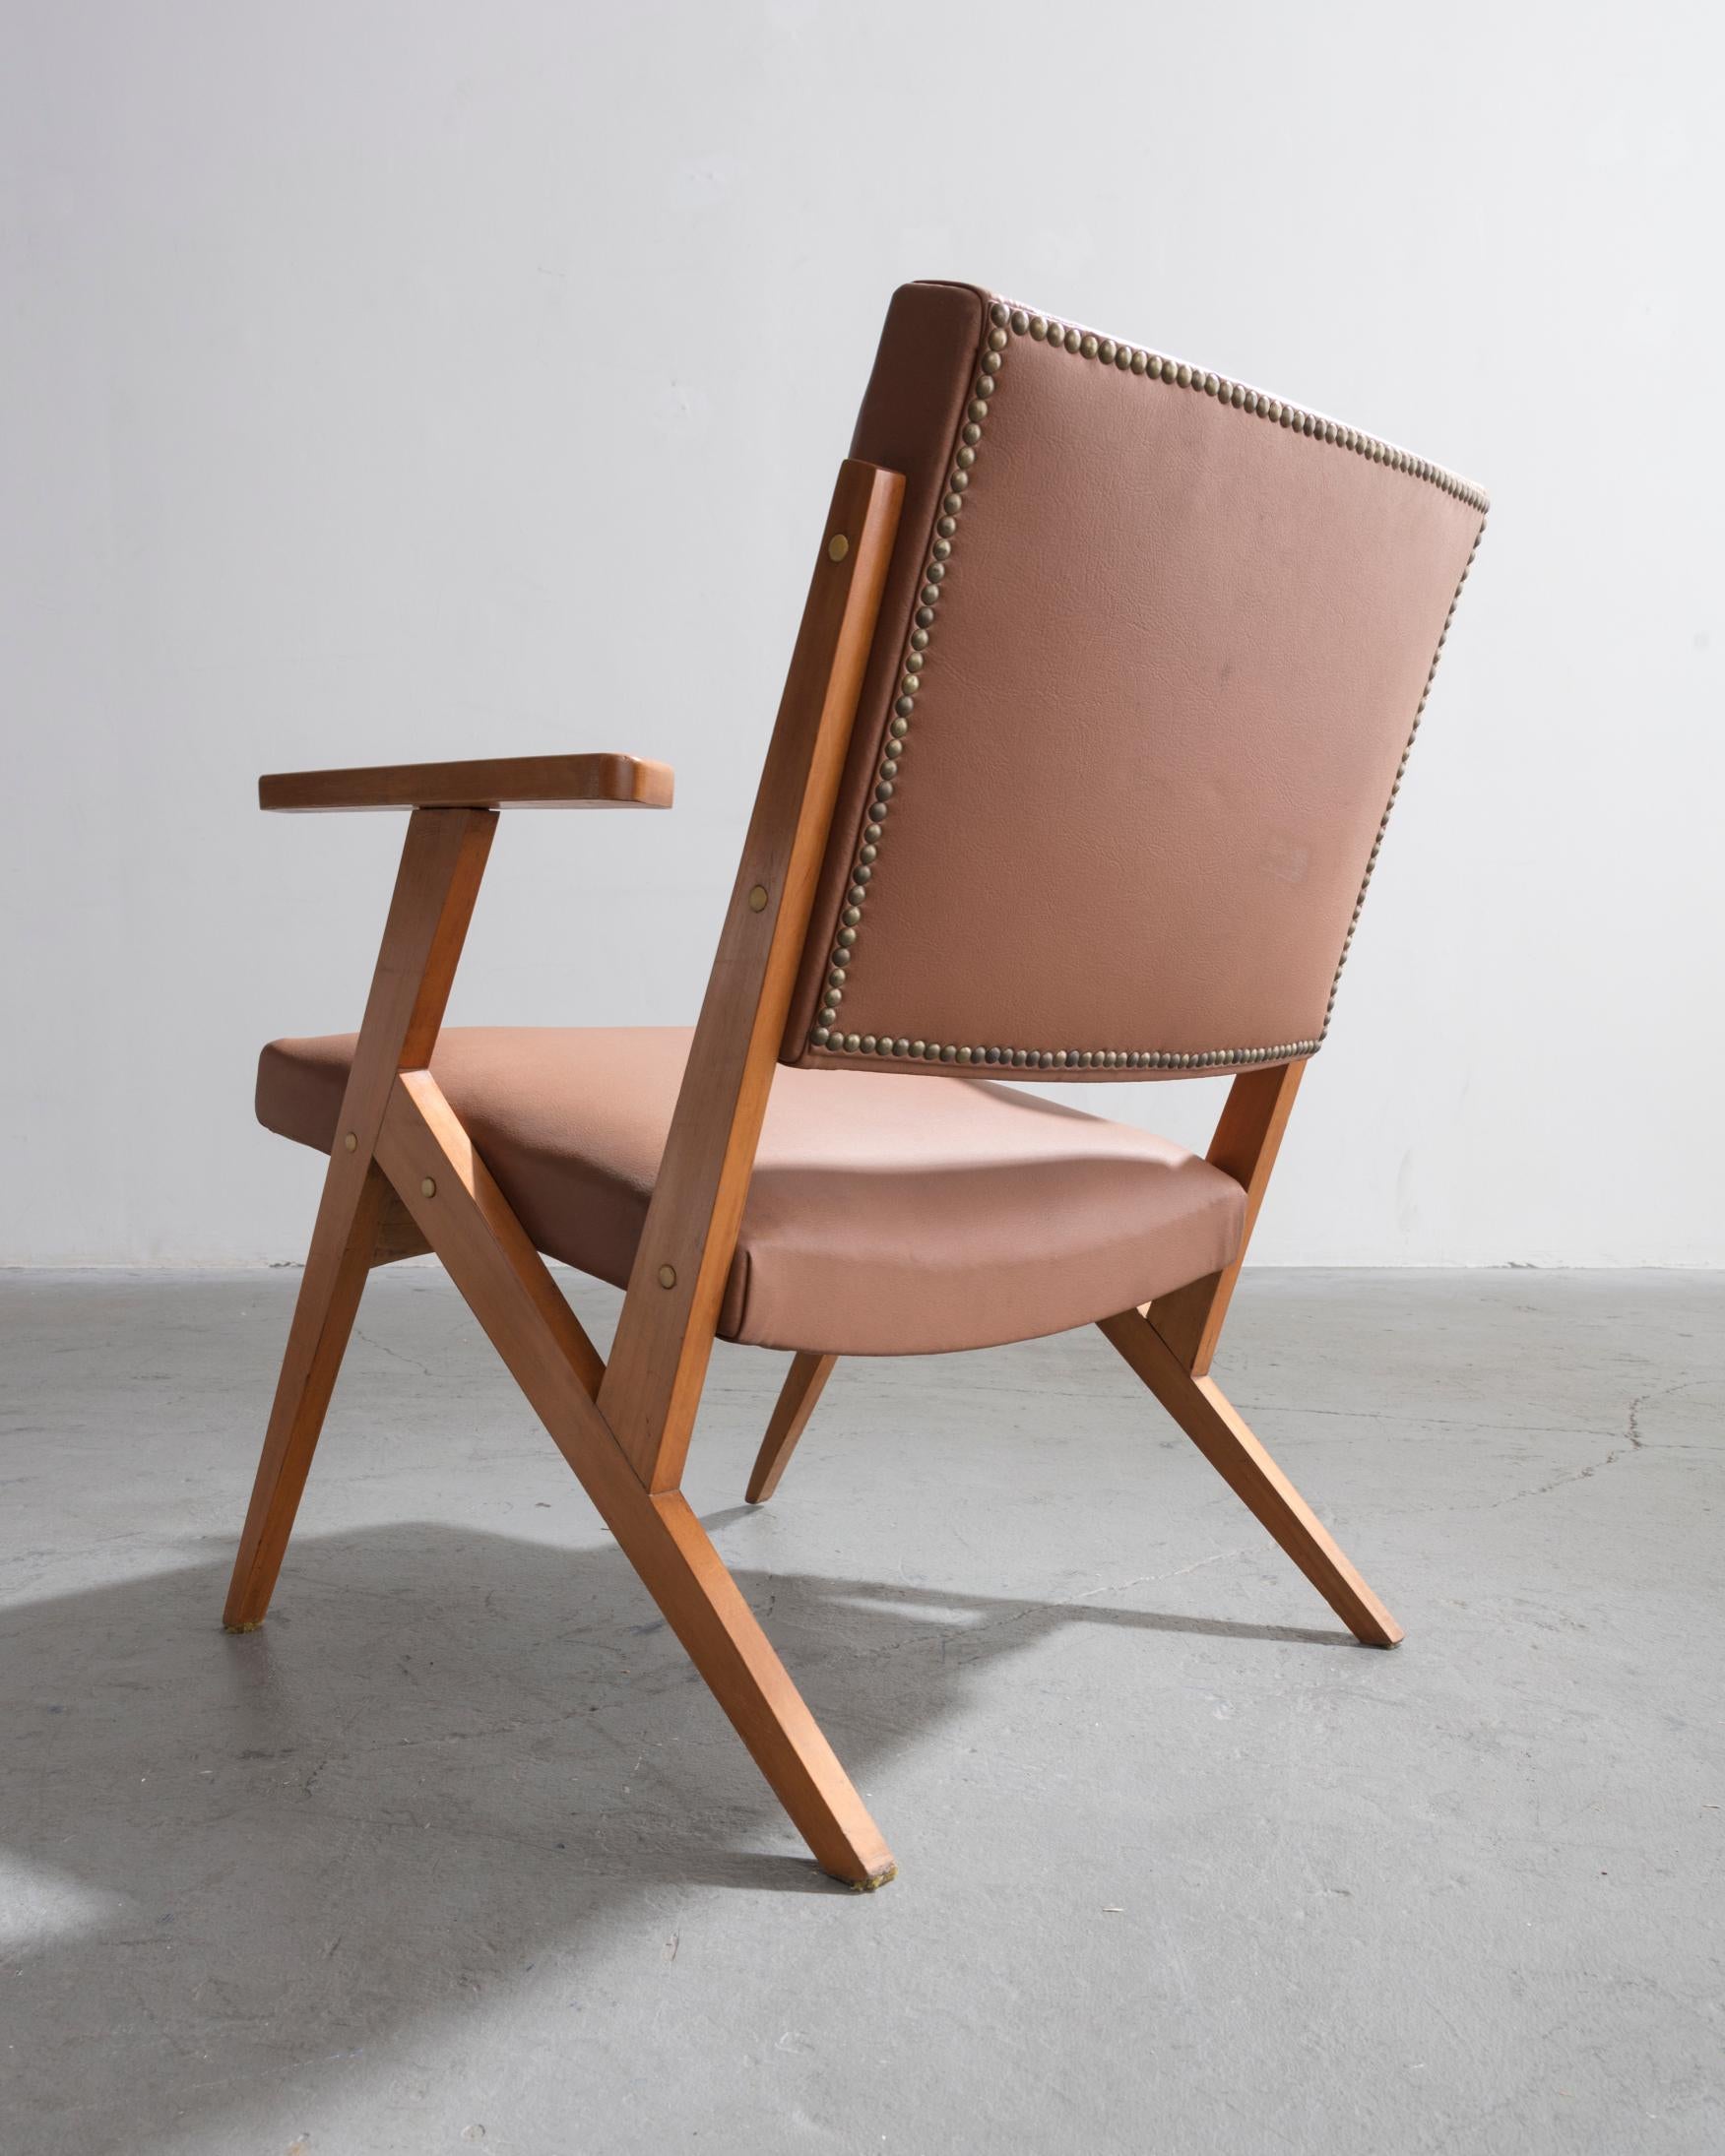 Modern Lounge Chair in Caviona Wood and Tan Leather by José Zanine Caldas, 1960s For Sale